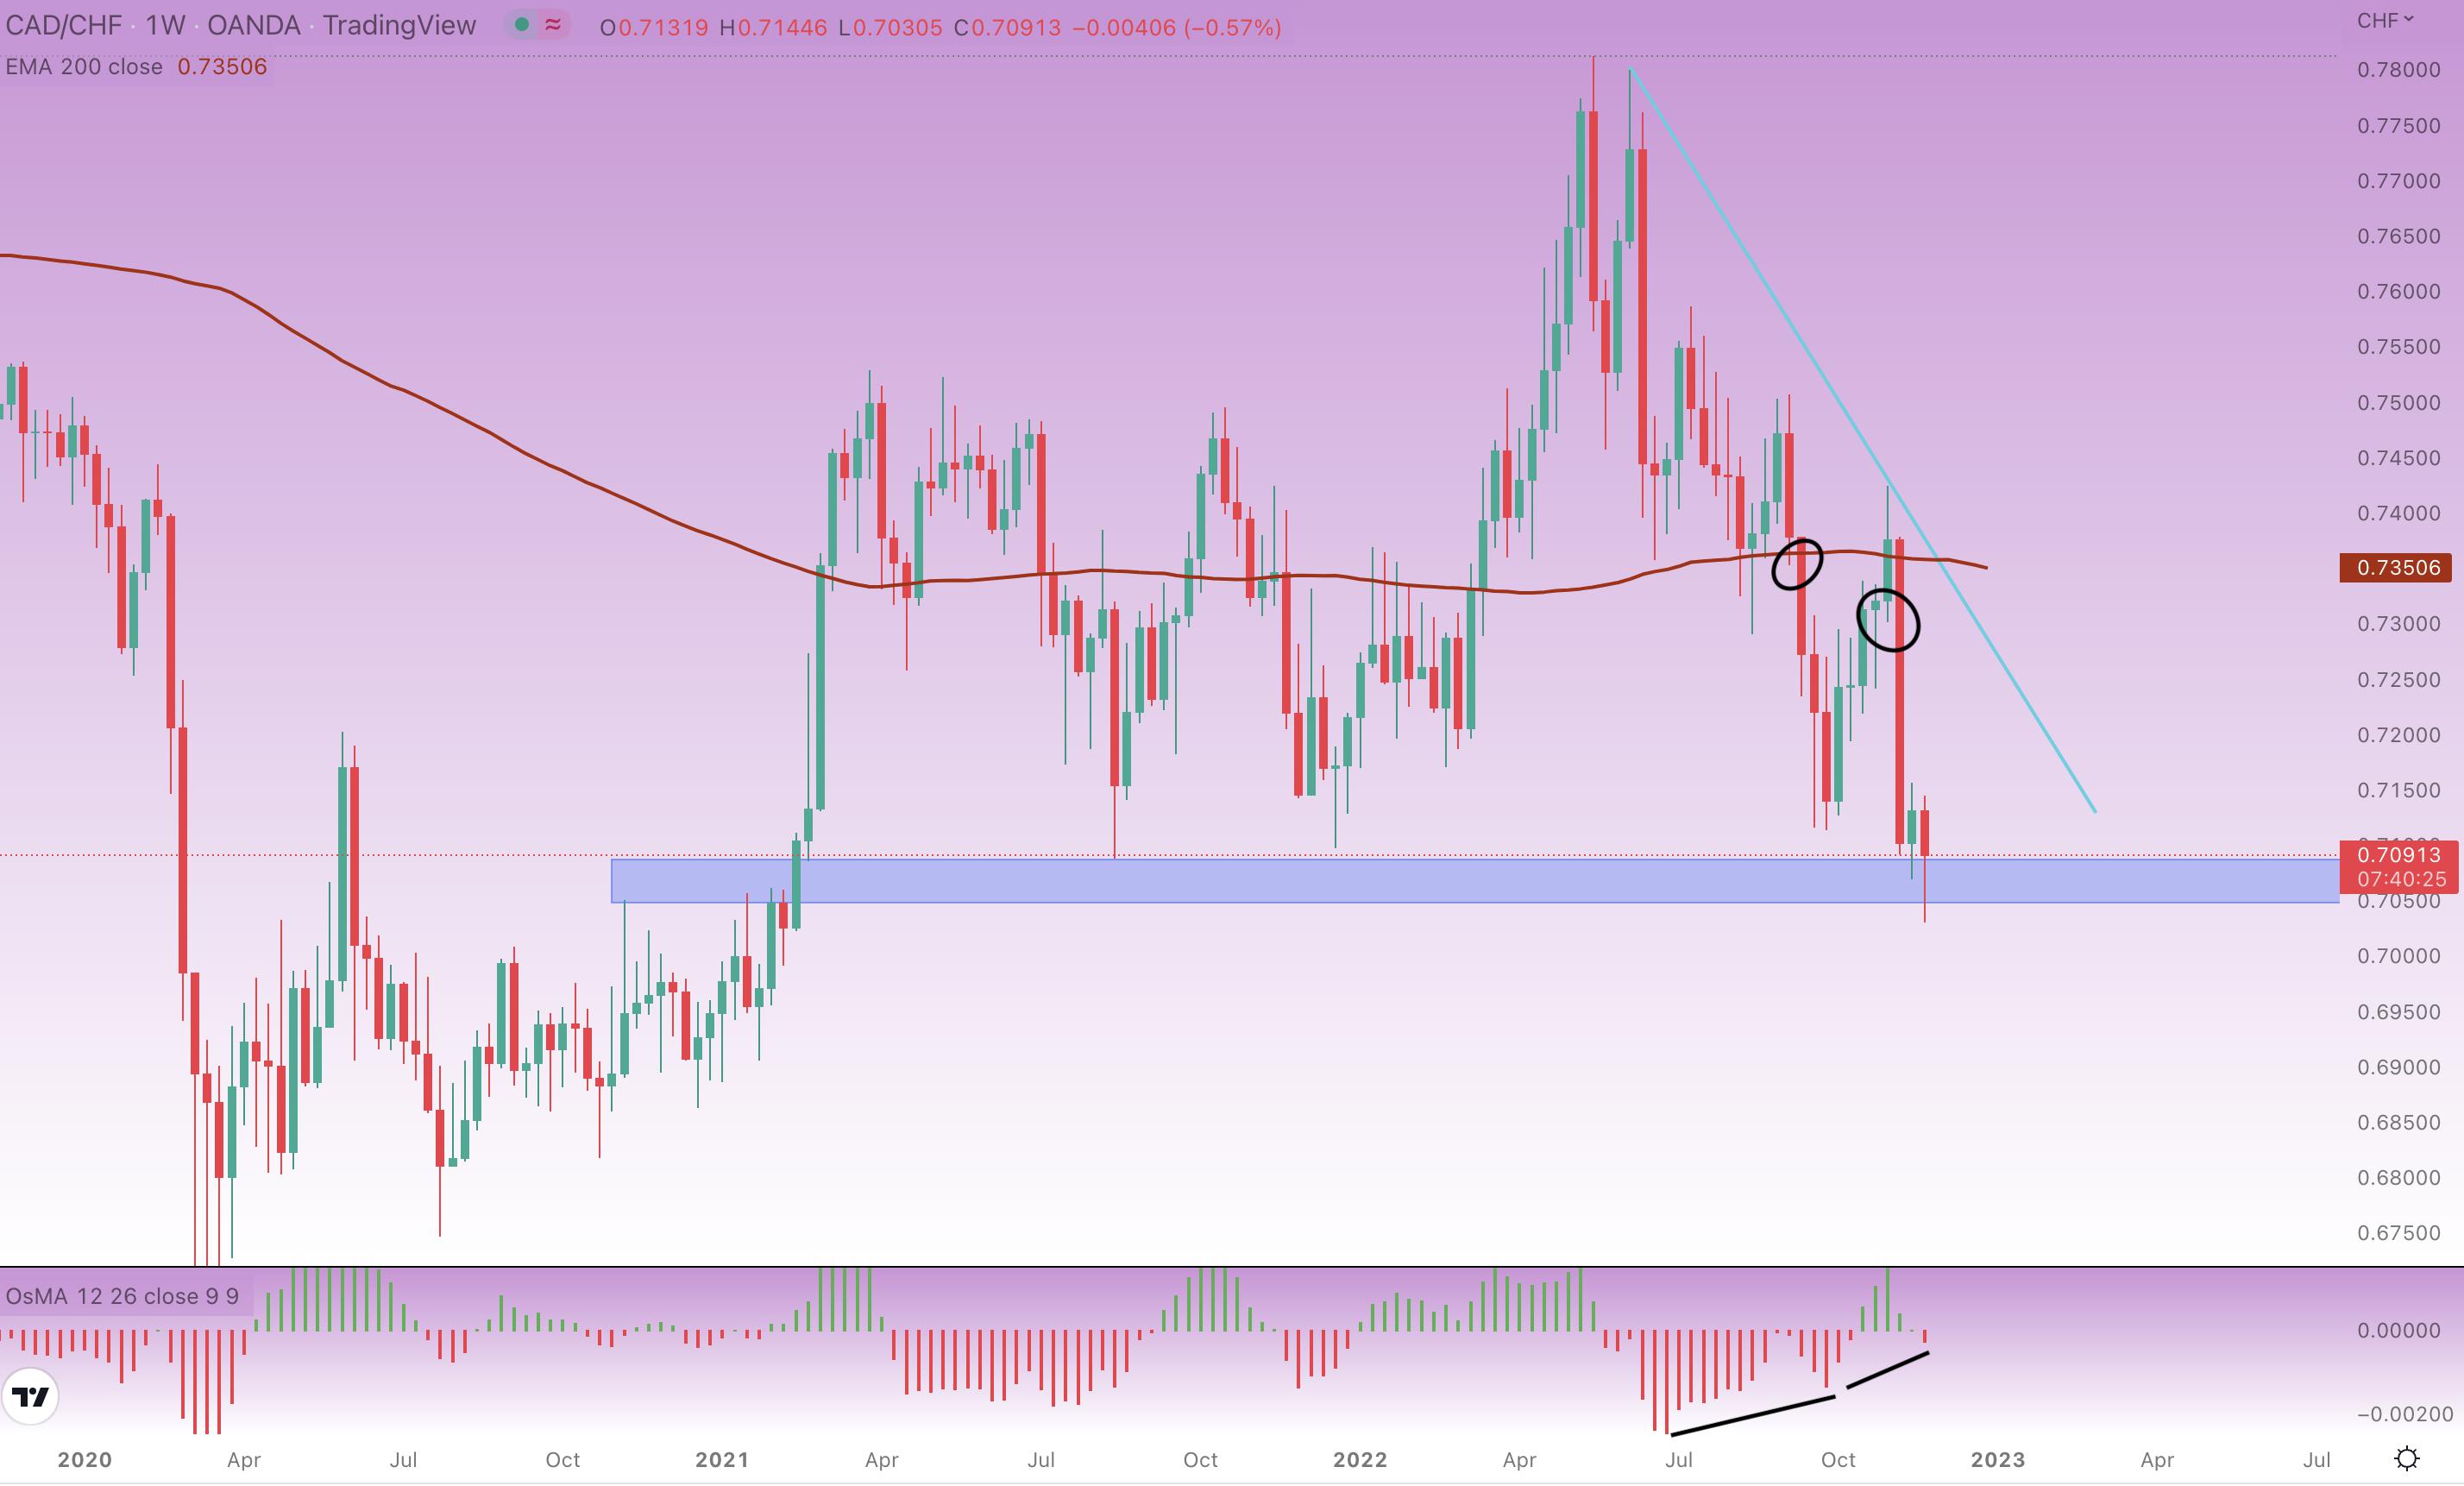 Forex analysis on EUR/USD, GBP/JPY and CAD/CHF